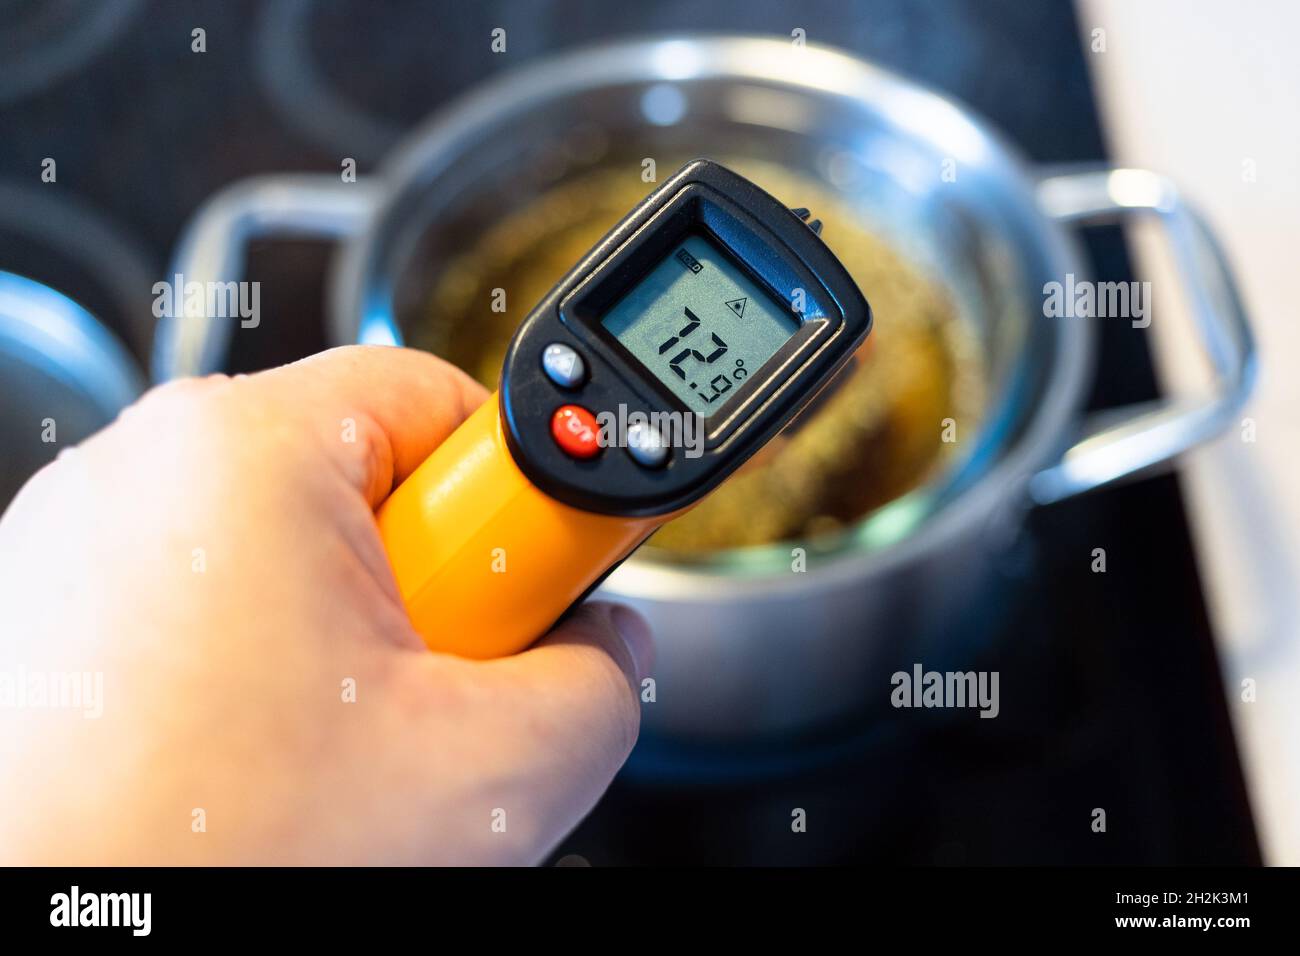 https://c8.alamy.com/comp/2H2K3M1/measuring-temperature-in-water-bath-by-infrared-thermometer-on-ceramic-stove-at-home-kitchen-2H2K3M1.jpg